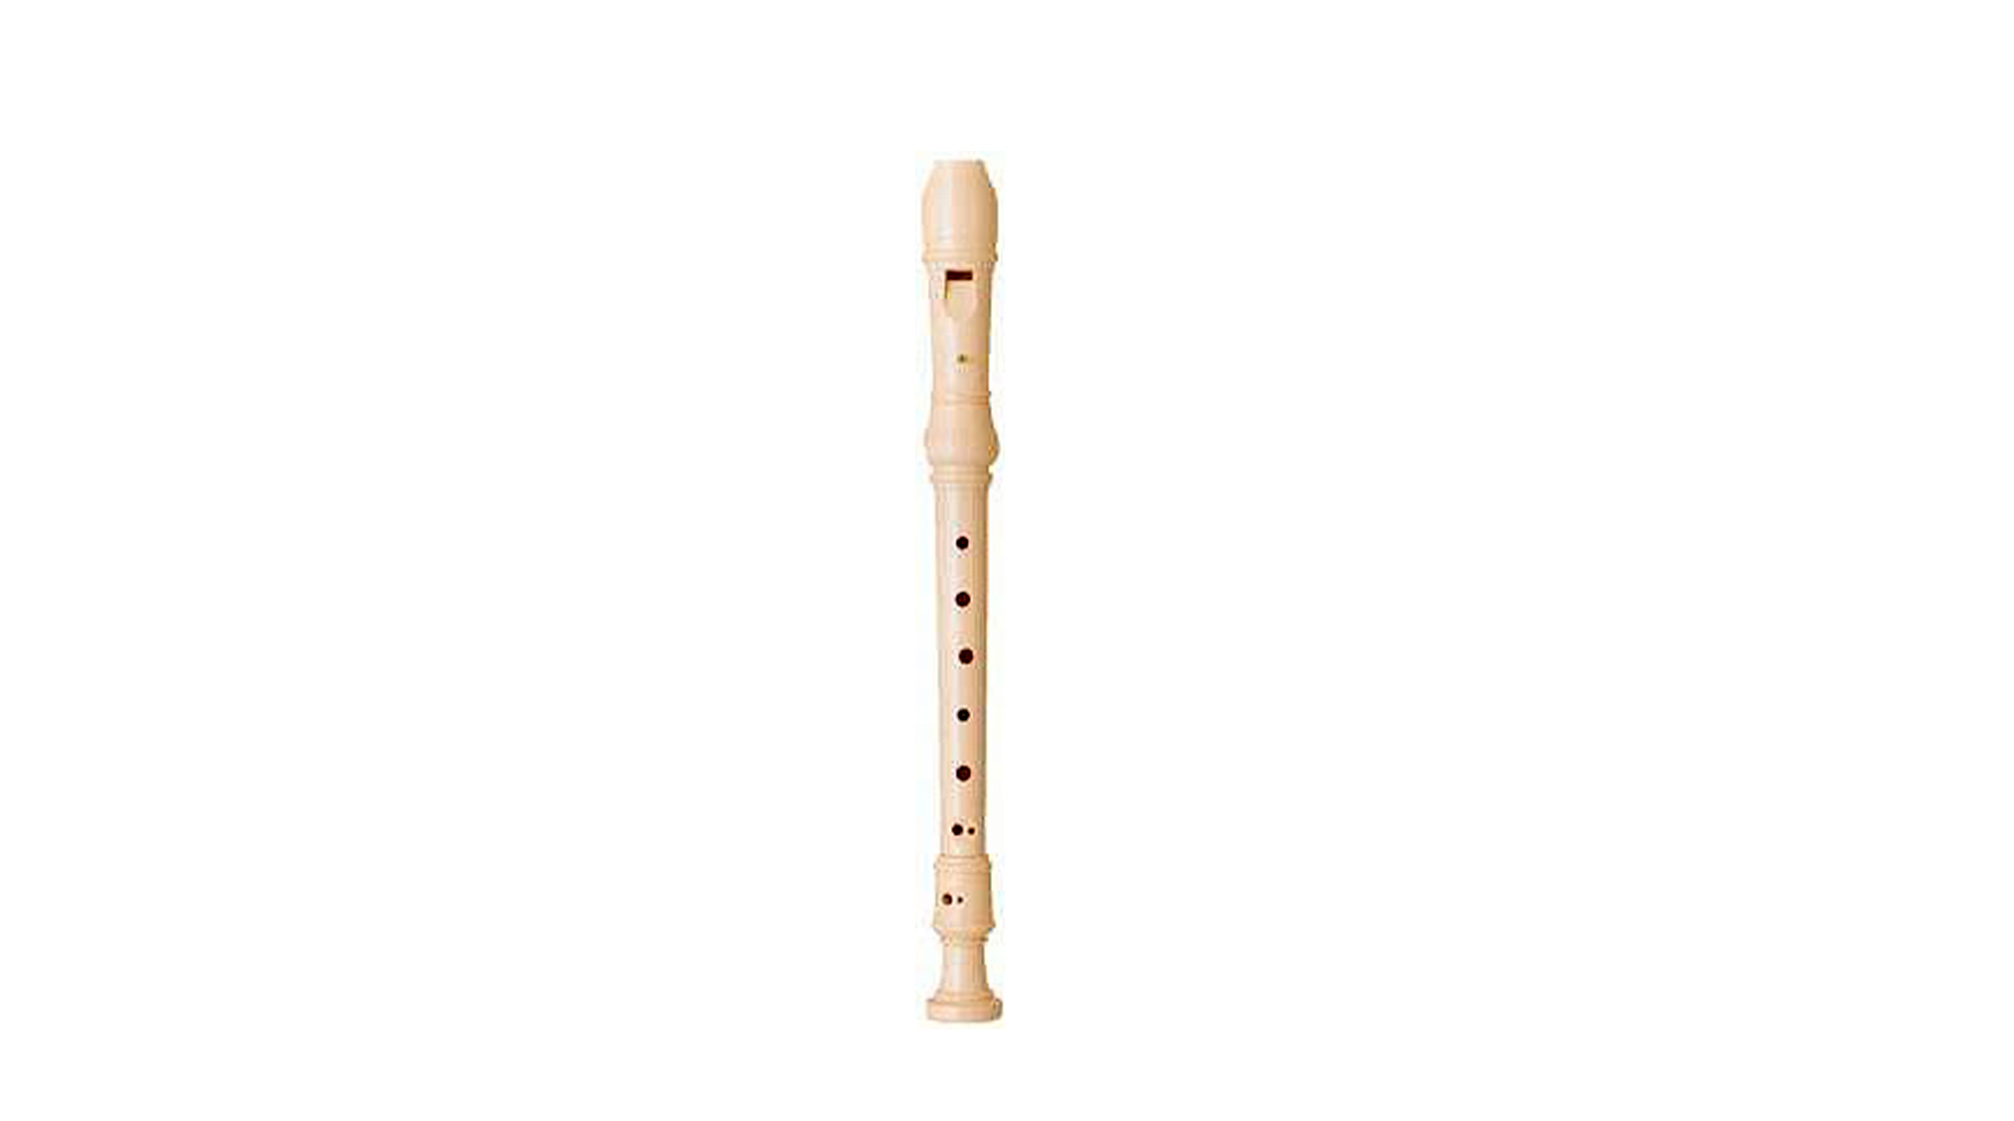 Yamaha, Soprano in c'', German double hole, Ivory color